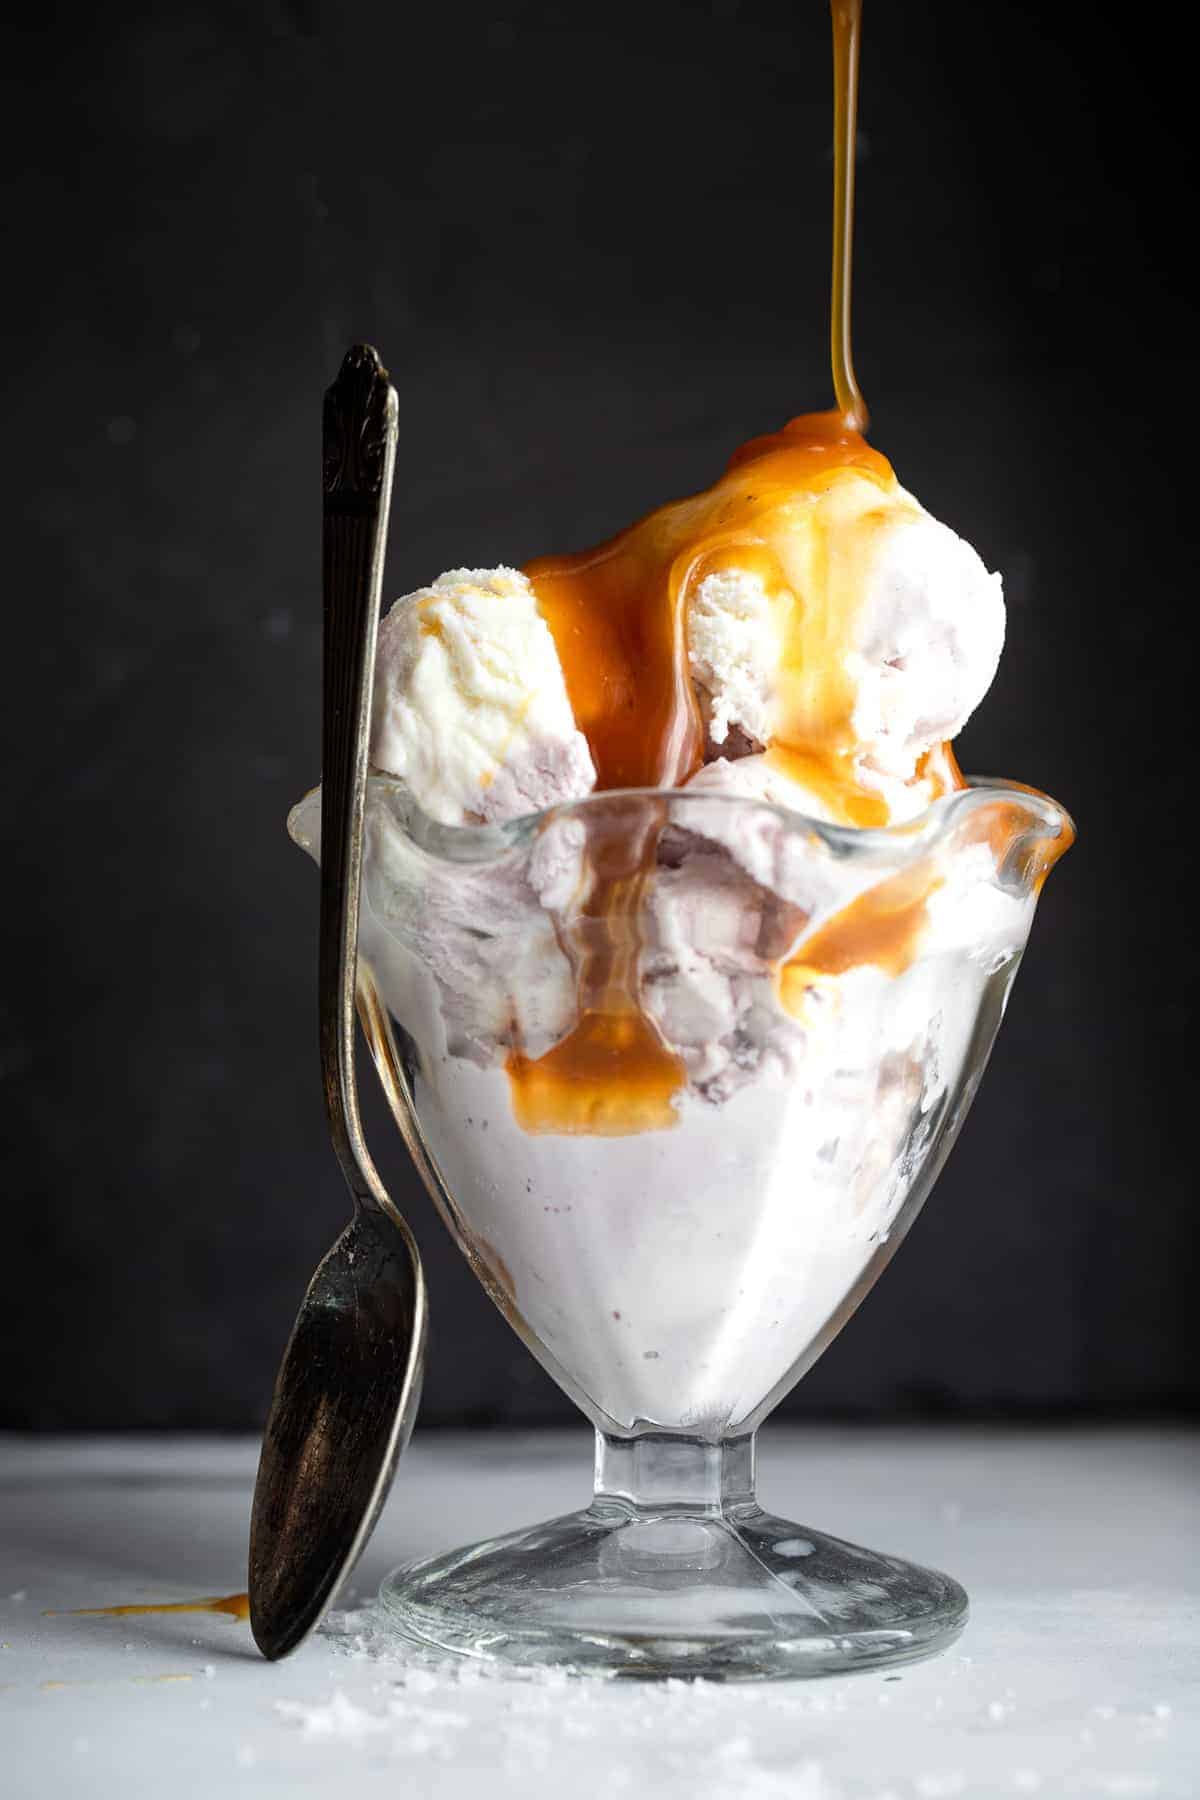 dairy free vegan caramel sauce being drizzled on ice cream